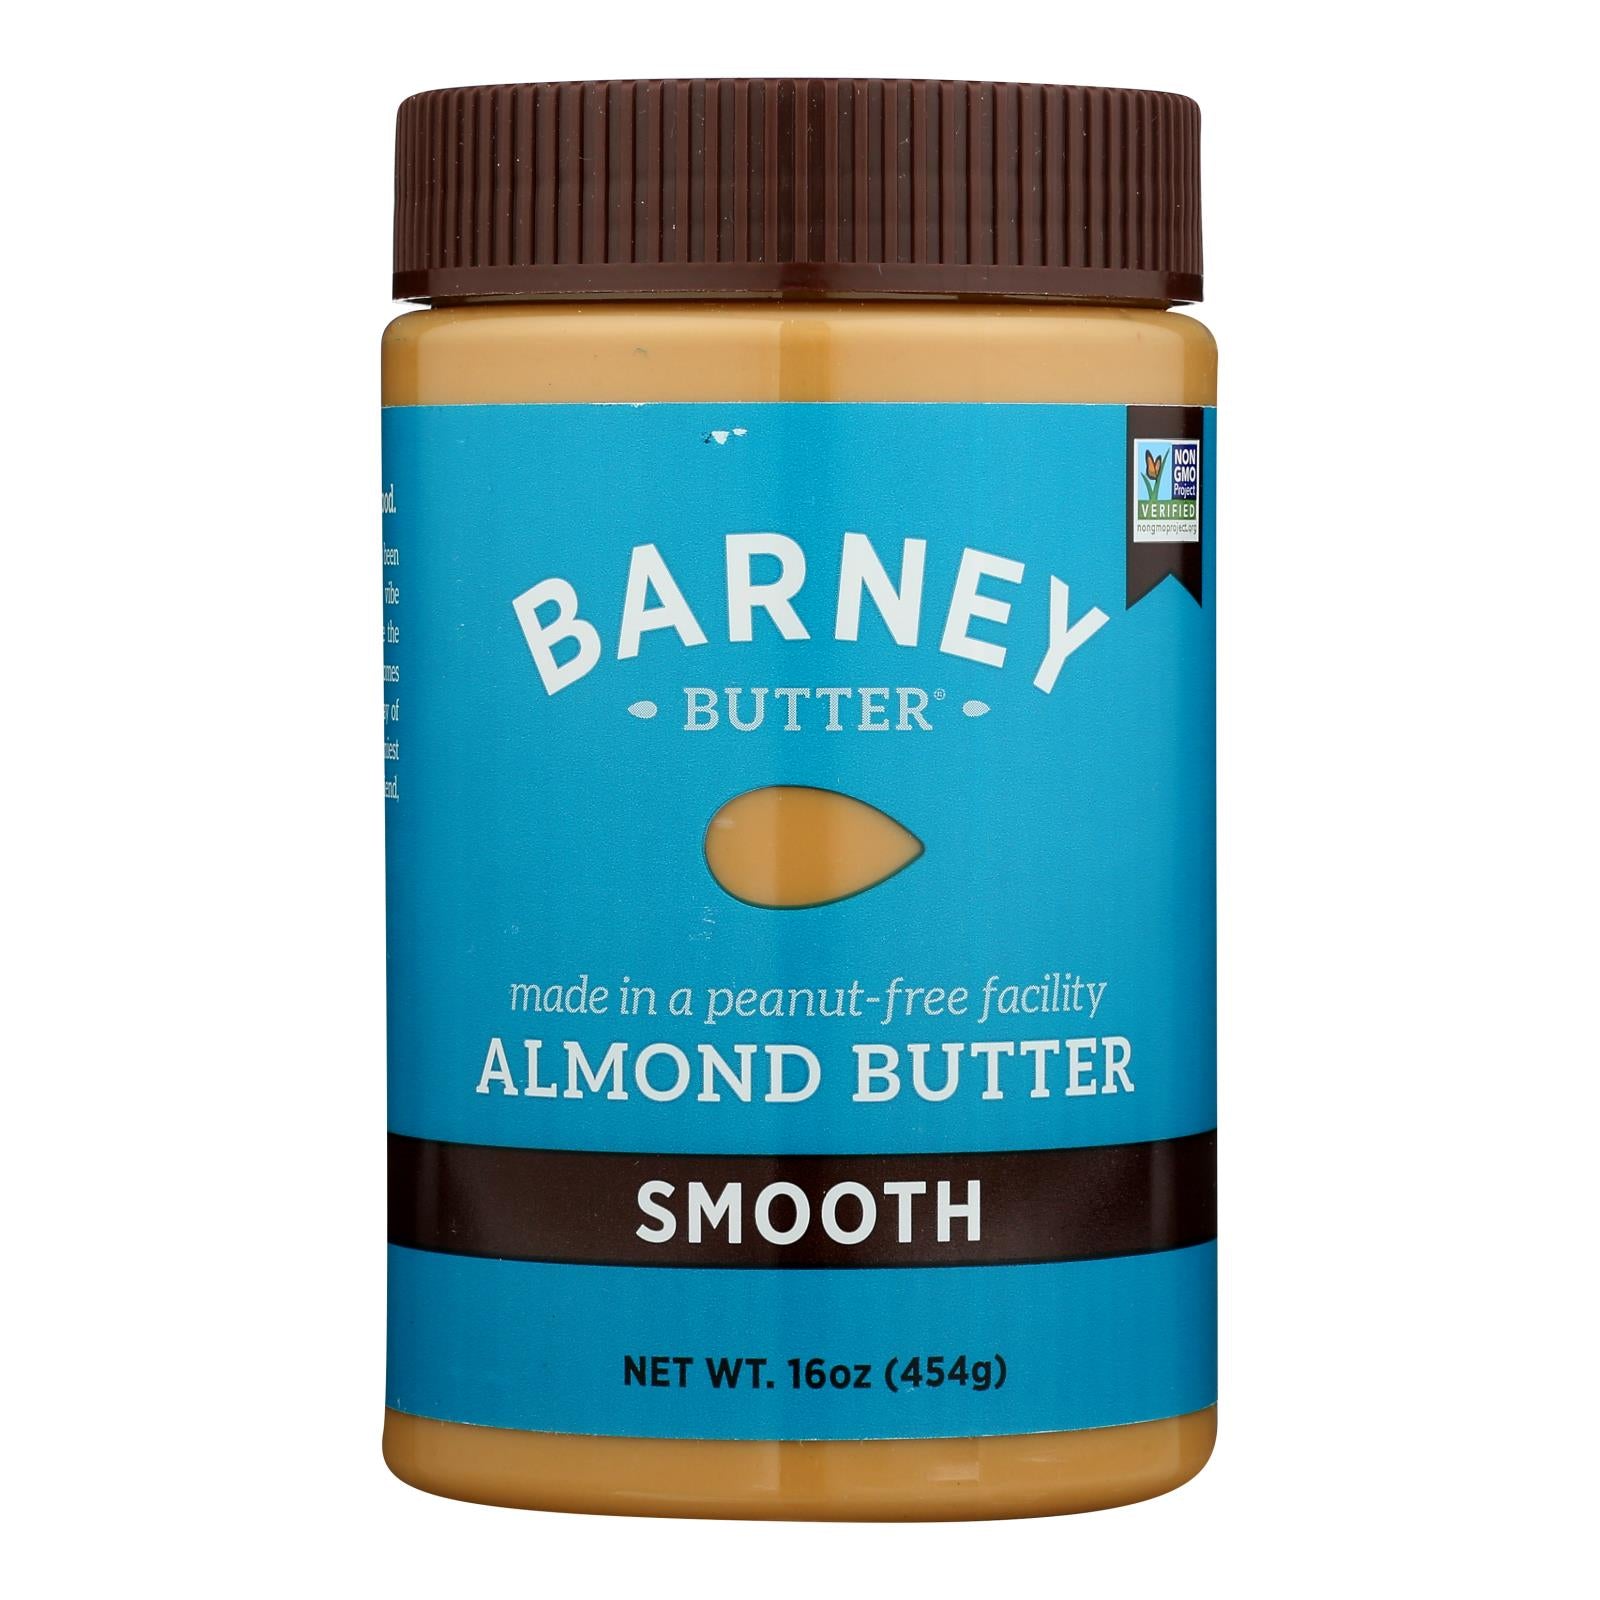 Barney Butter - Almond Butter - Smooth - Case Of 6 - 16 Oz.